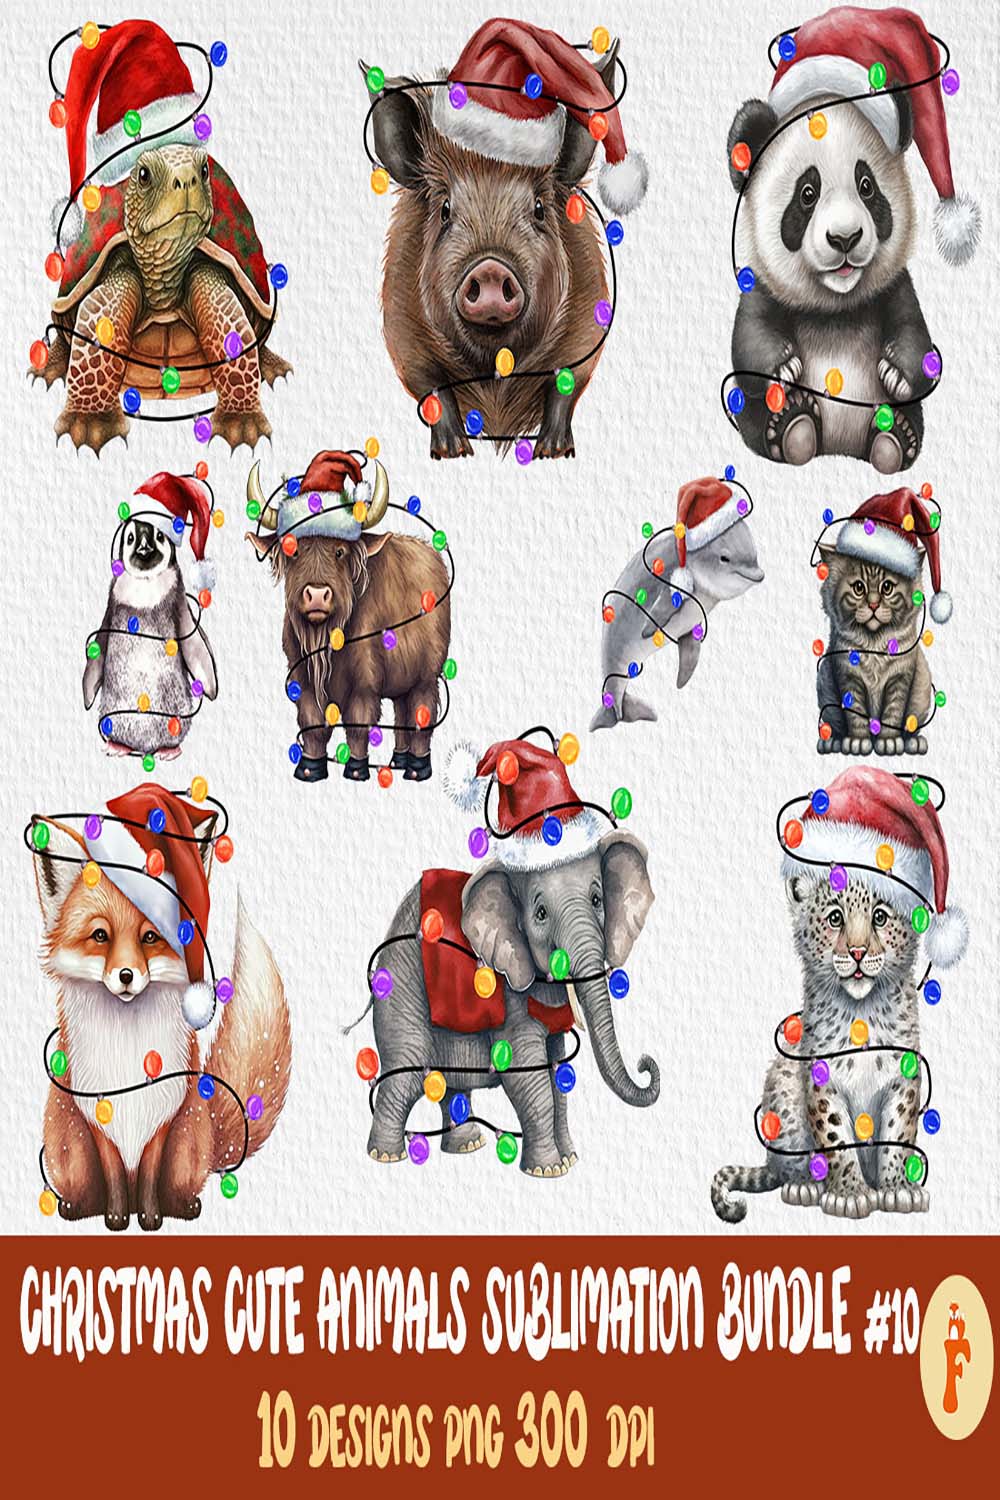 Collection of wonderful images of animals in Christmas clothes.